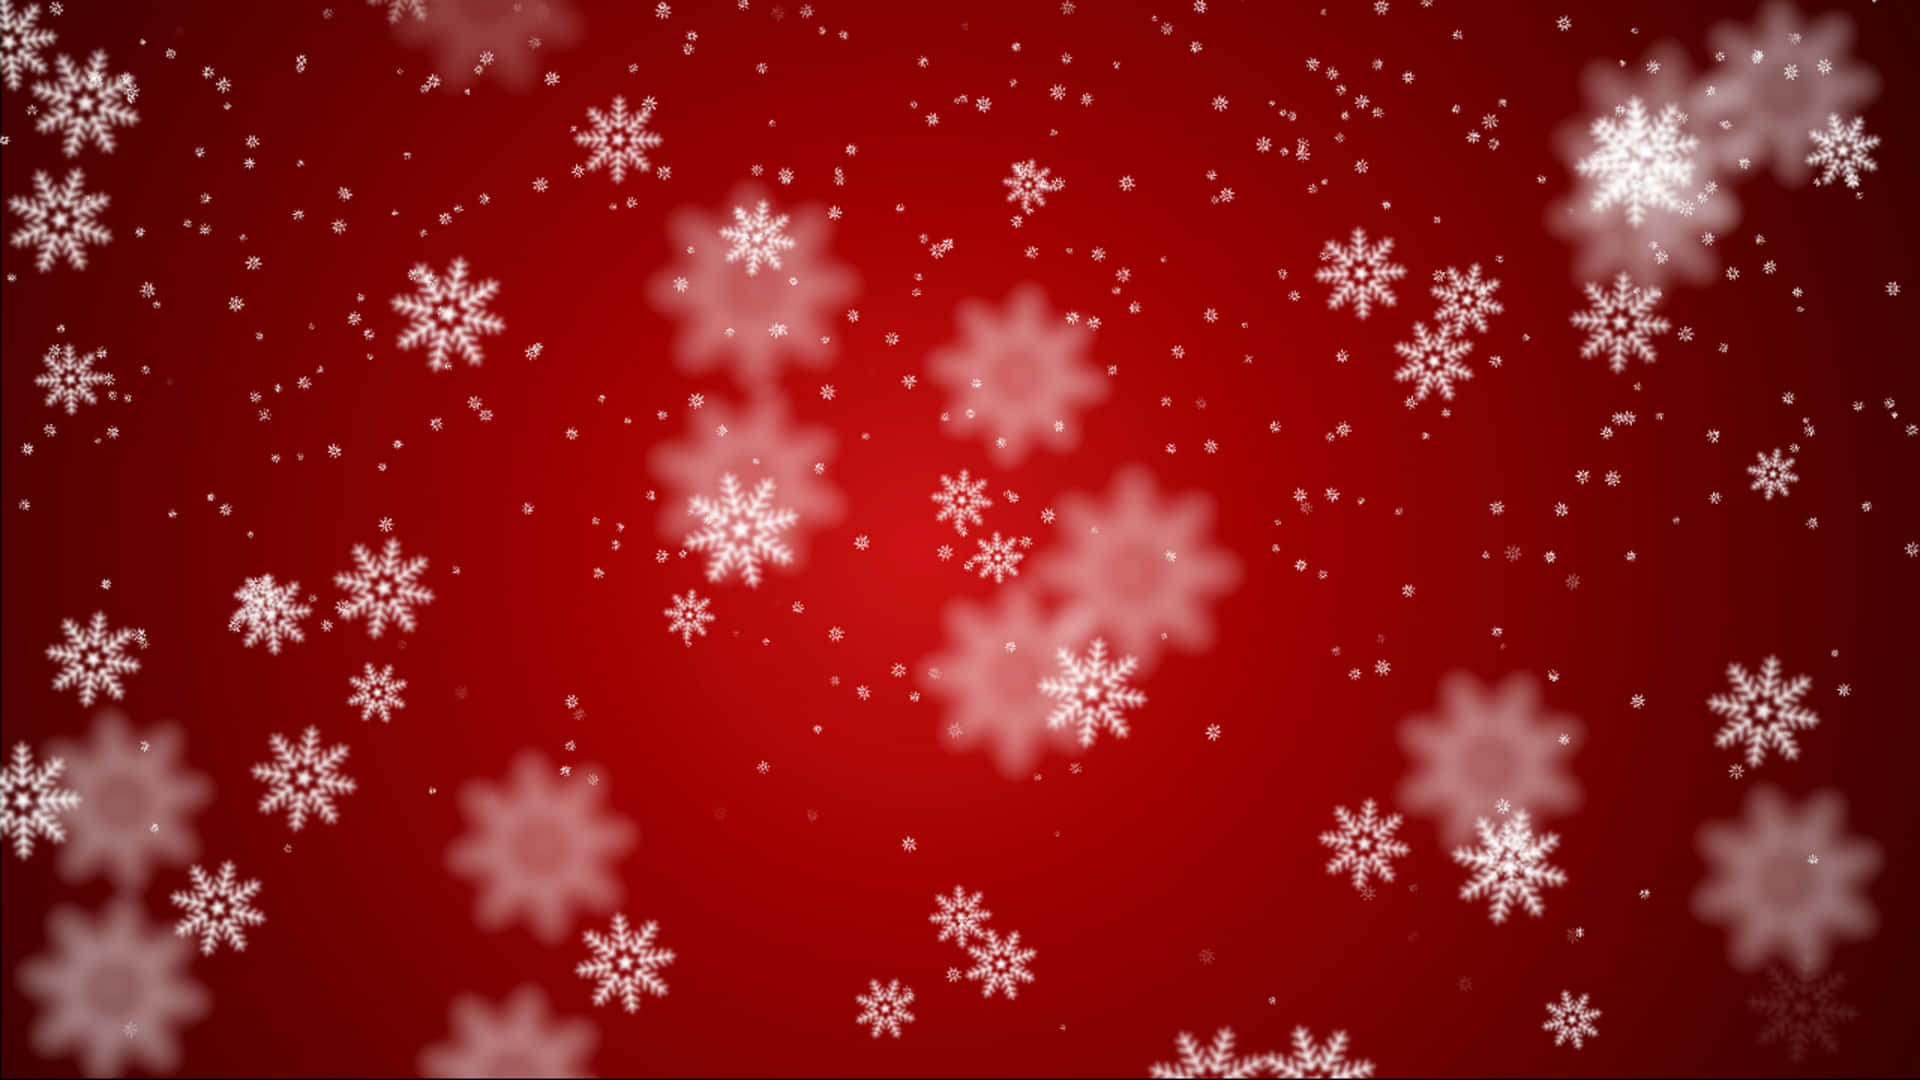 Spreading holiday cheer with a red aesthetic Christmas Wallpaper